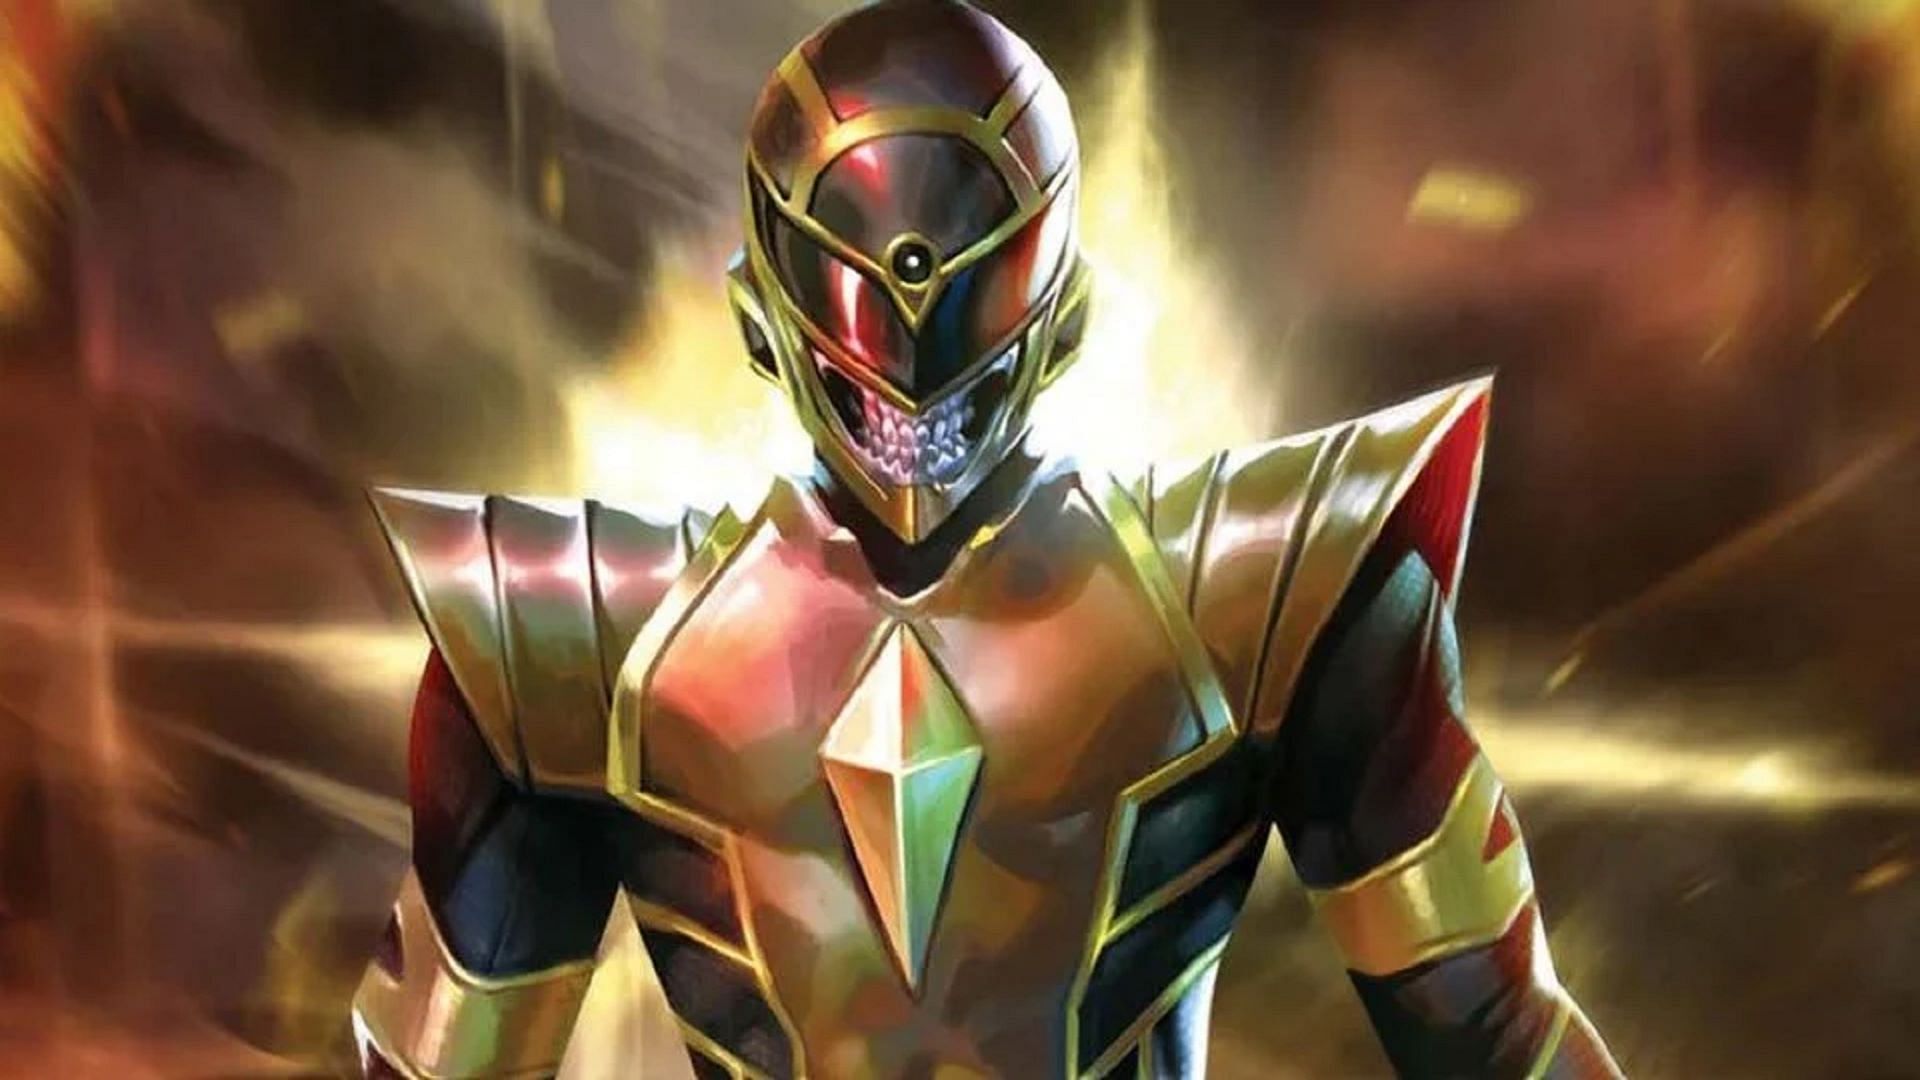 Death Ranger gets introduced in the World of Power Rangers (Image via Twitter)